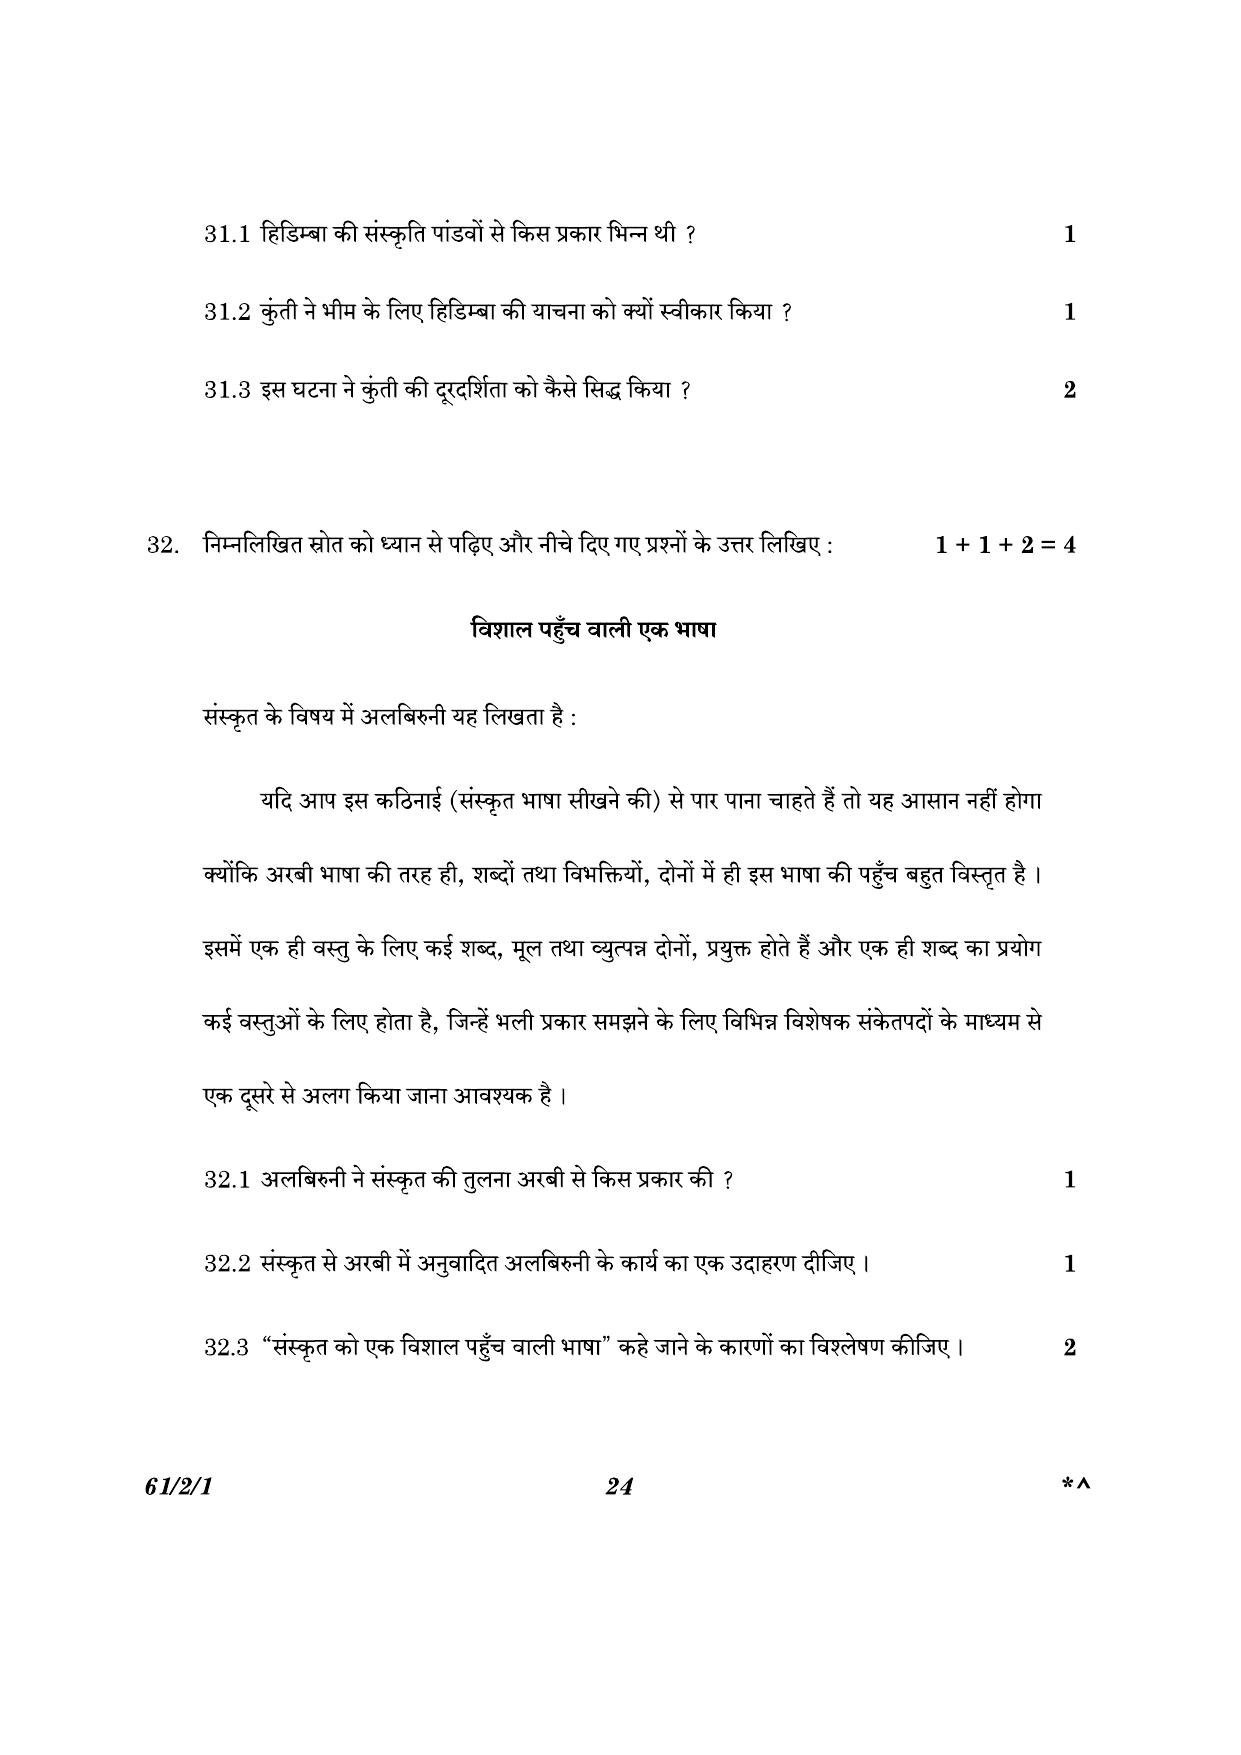 CBSE Class 12 61-2-1 History 2023 Question Paper - Page 24